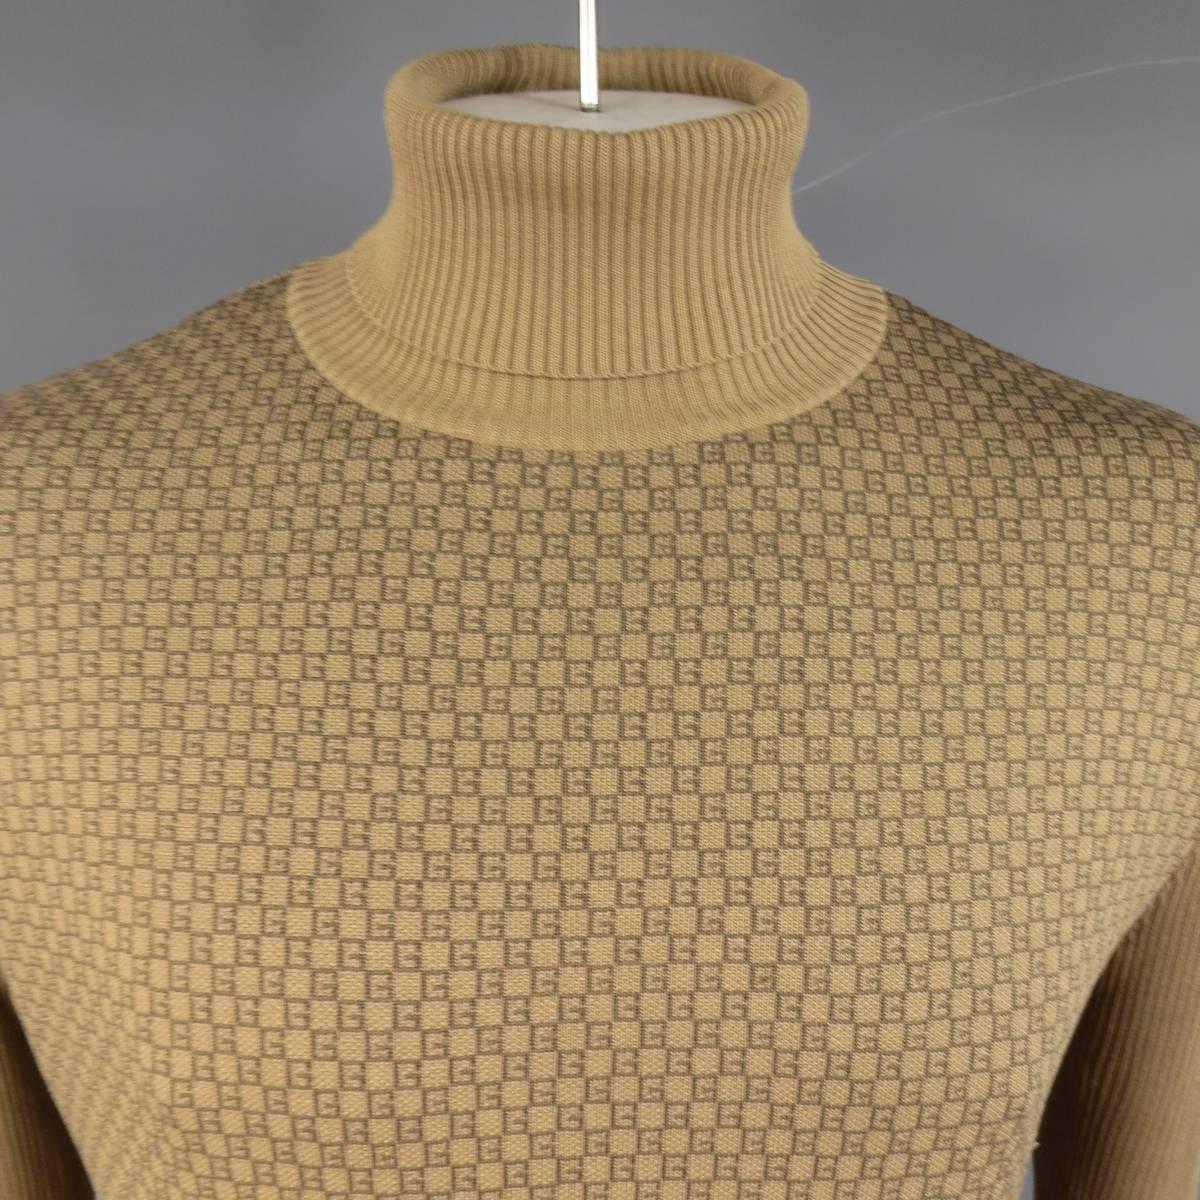 Golden tan khaki ribbed silk print turtleneck sweater by GUCCI featuring a frontal brown G monogram print panel. Made in Italy.
 
Excellent Pre-Owned Condition.
Marked: L
 
Measurements:
 
Shoulder: 21 in.
Chest: 48 in.
Sleeve: 27 in.
Length: 28